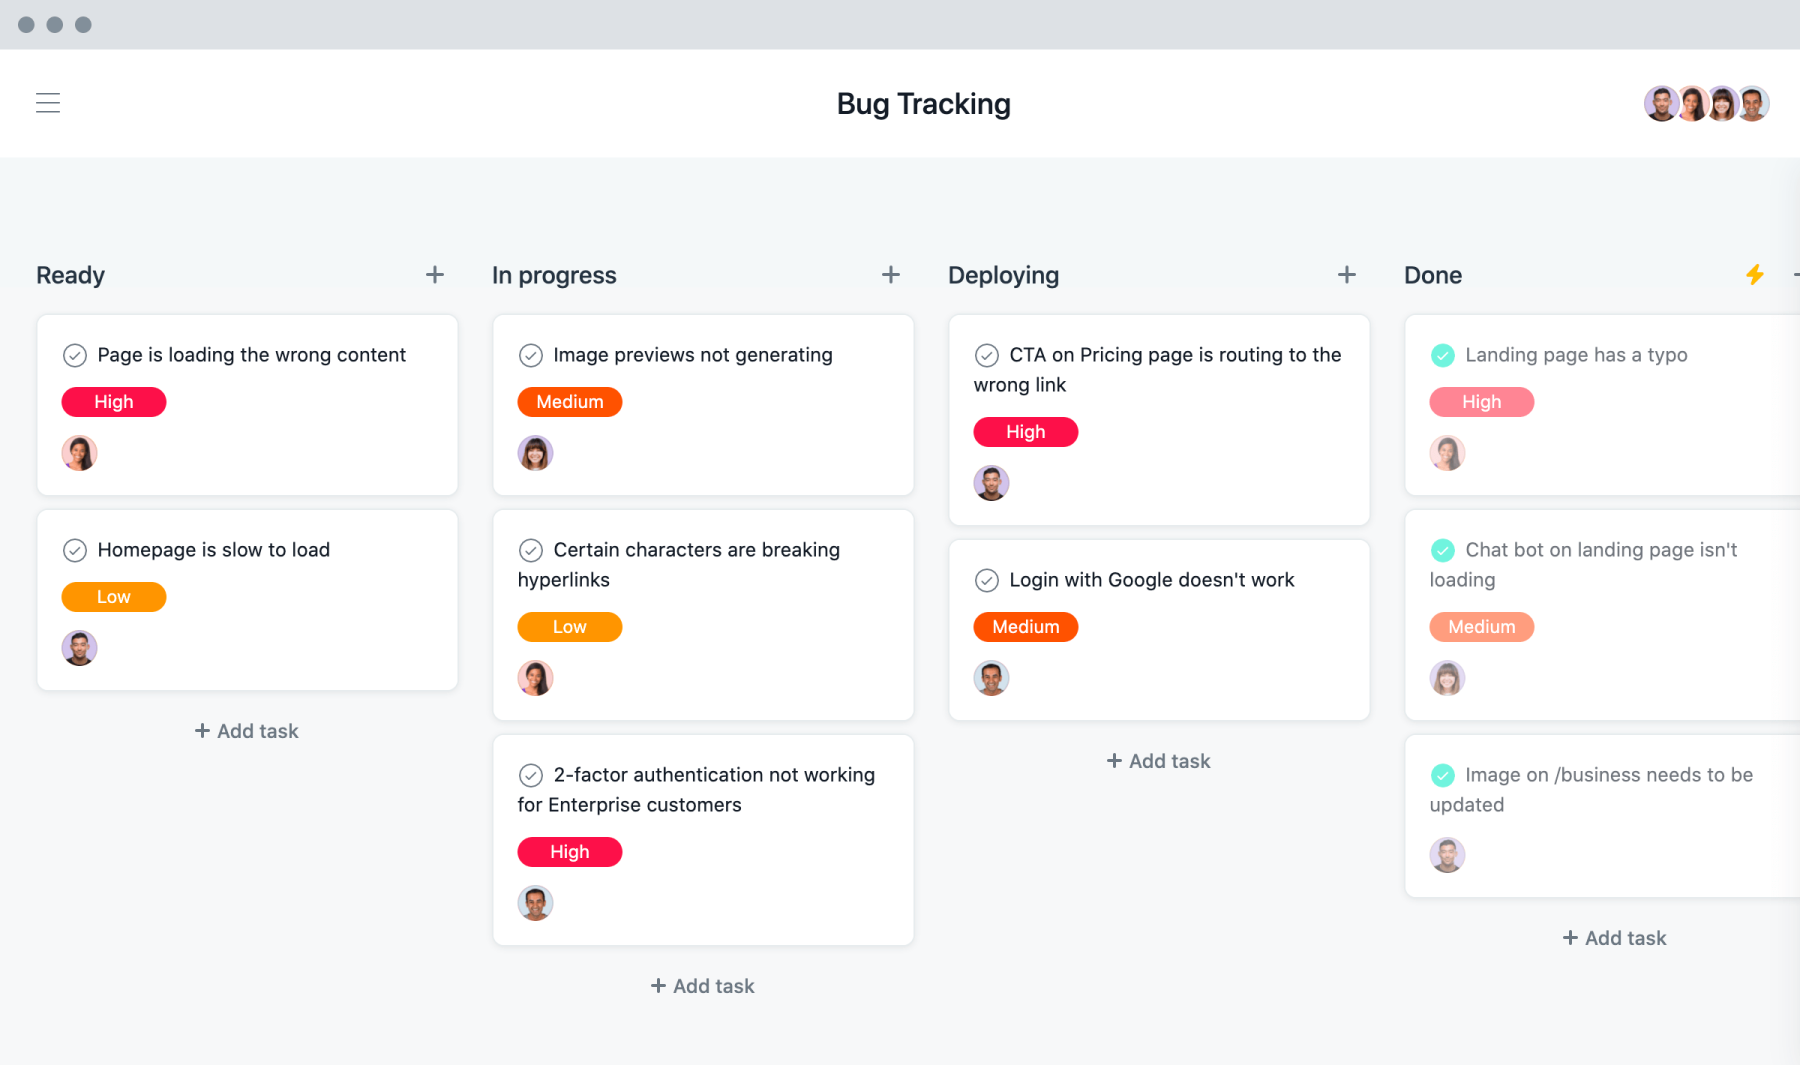 [Old Product UI] Bug tracking Kanban board example (Boards)